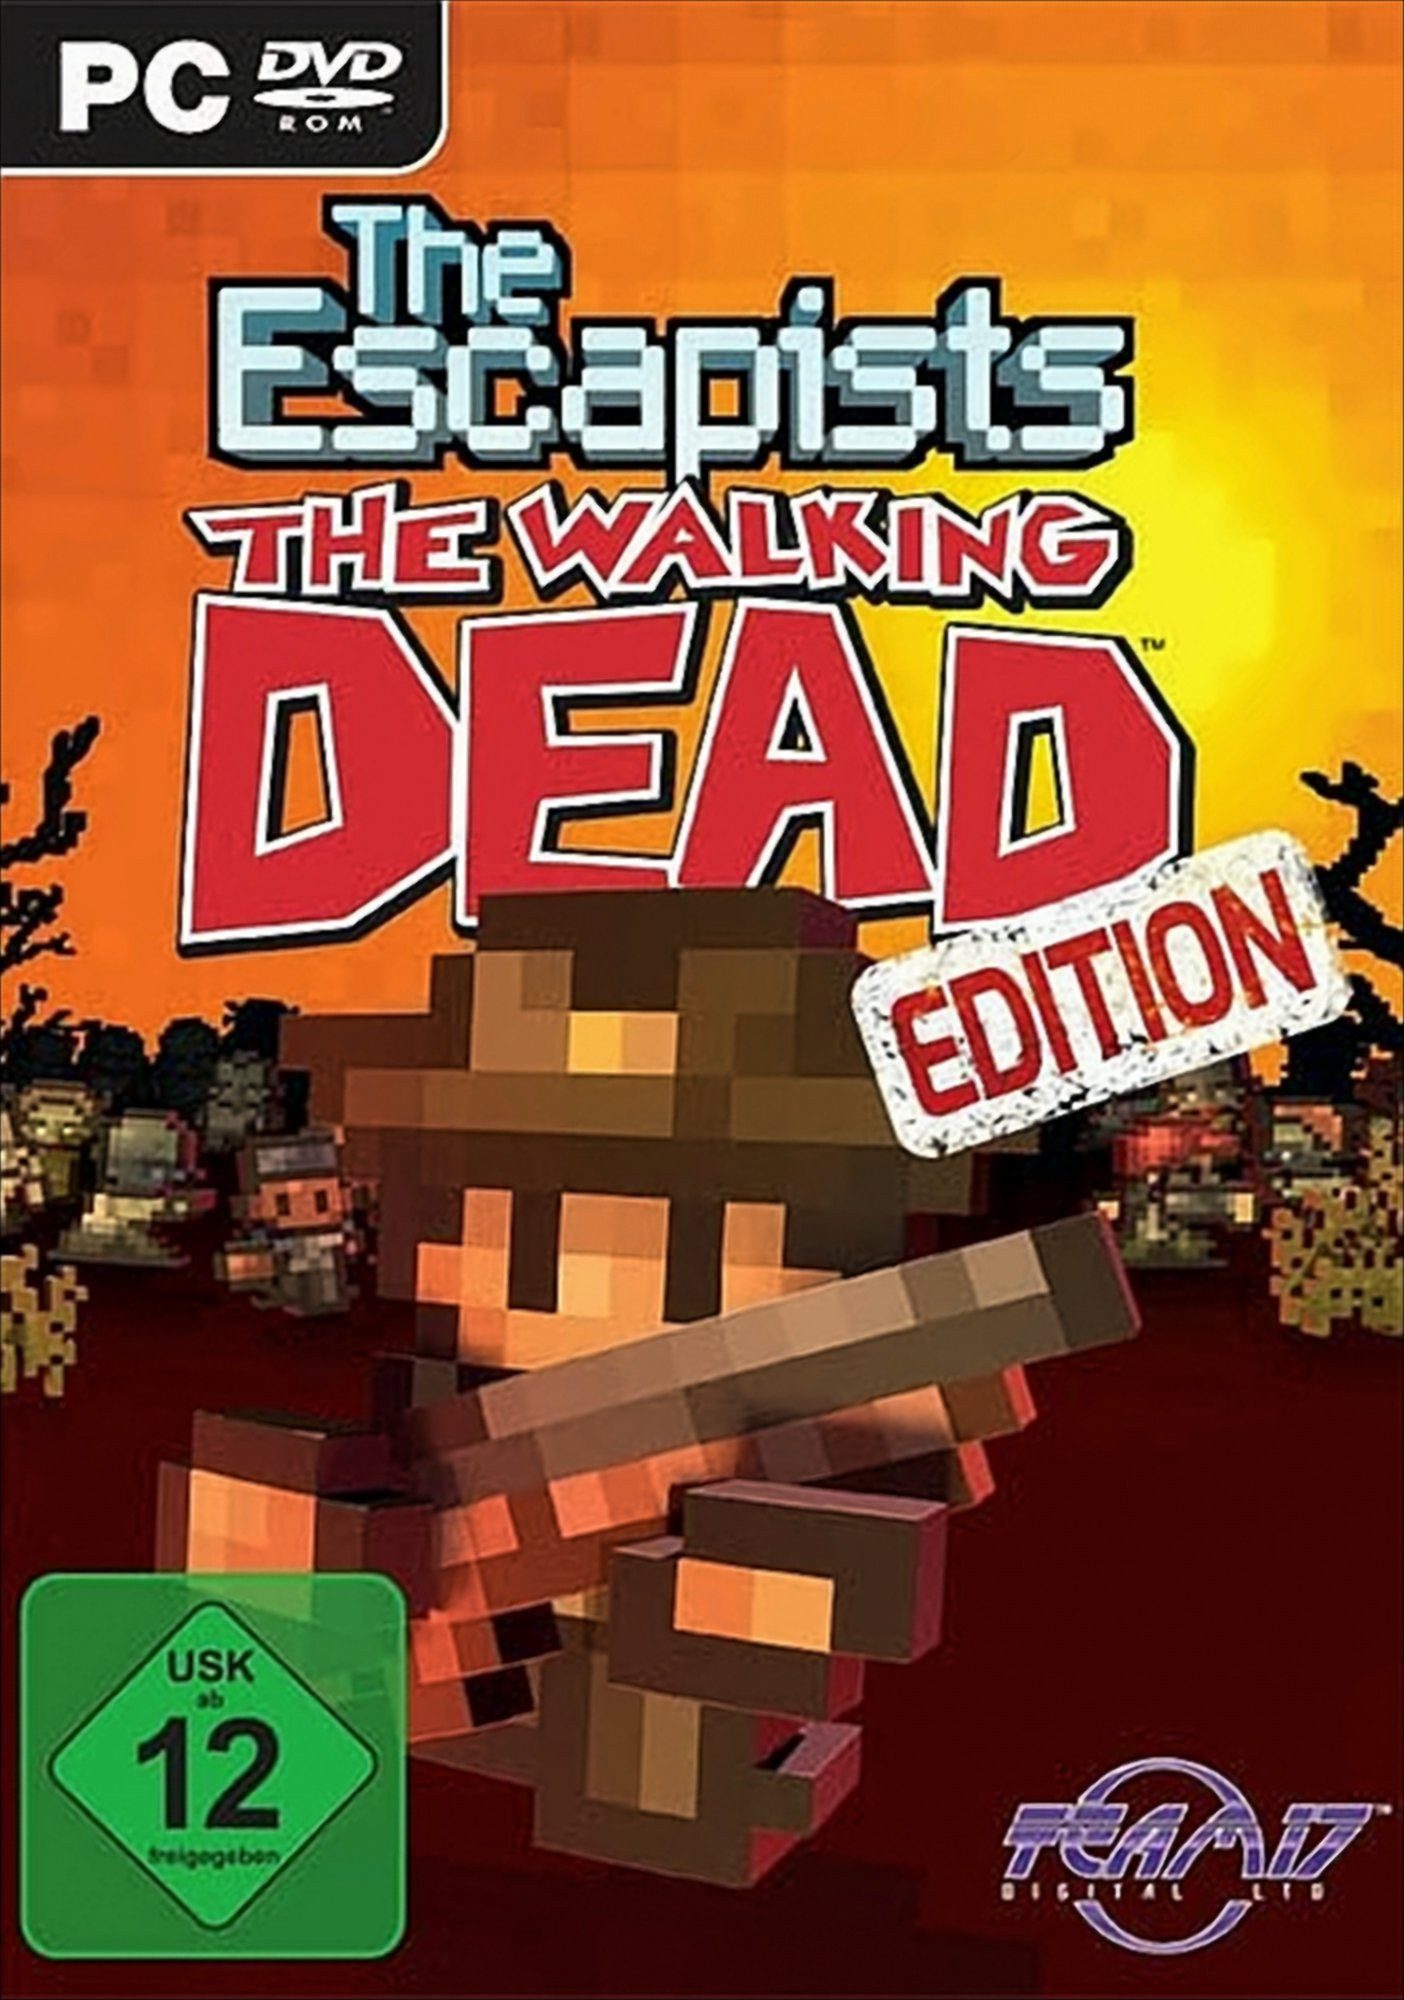 The Escapists: The Walking Dead Edition PC